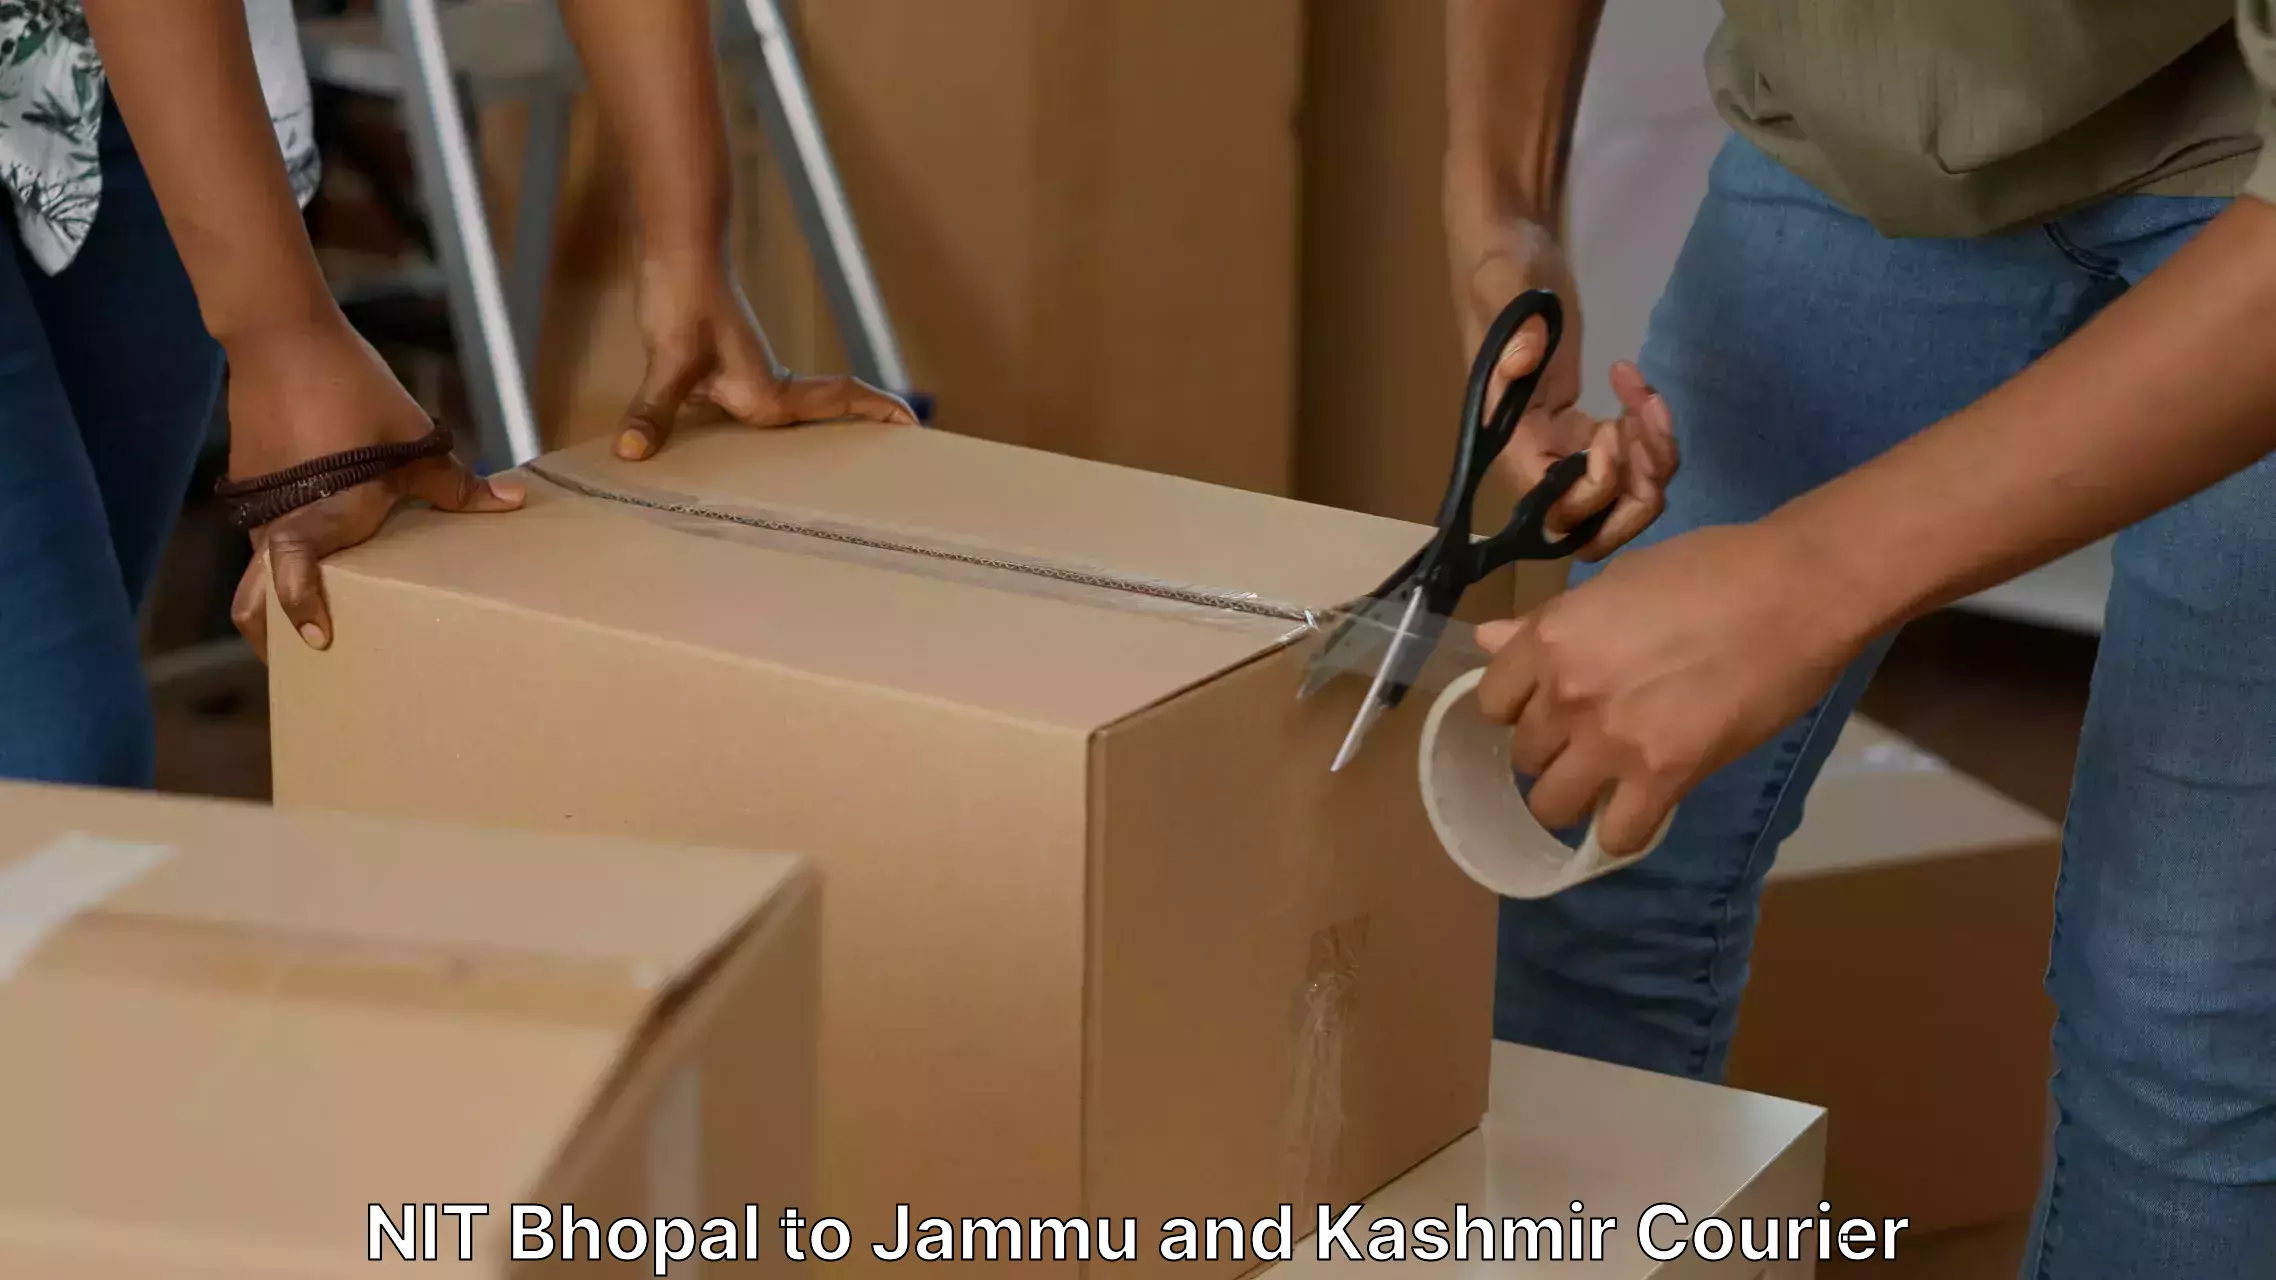 Furniture transport and logistics in NIT Bhopal to University of Jammu